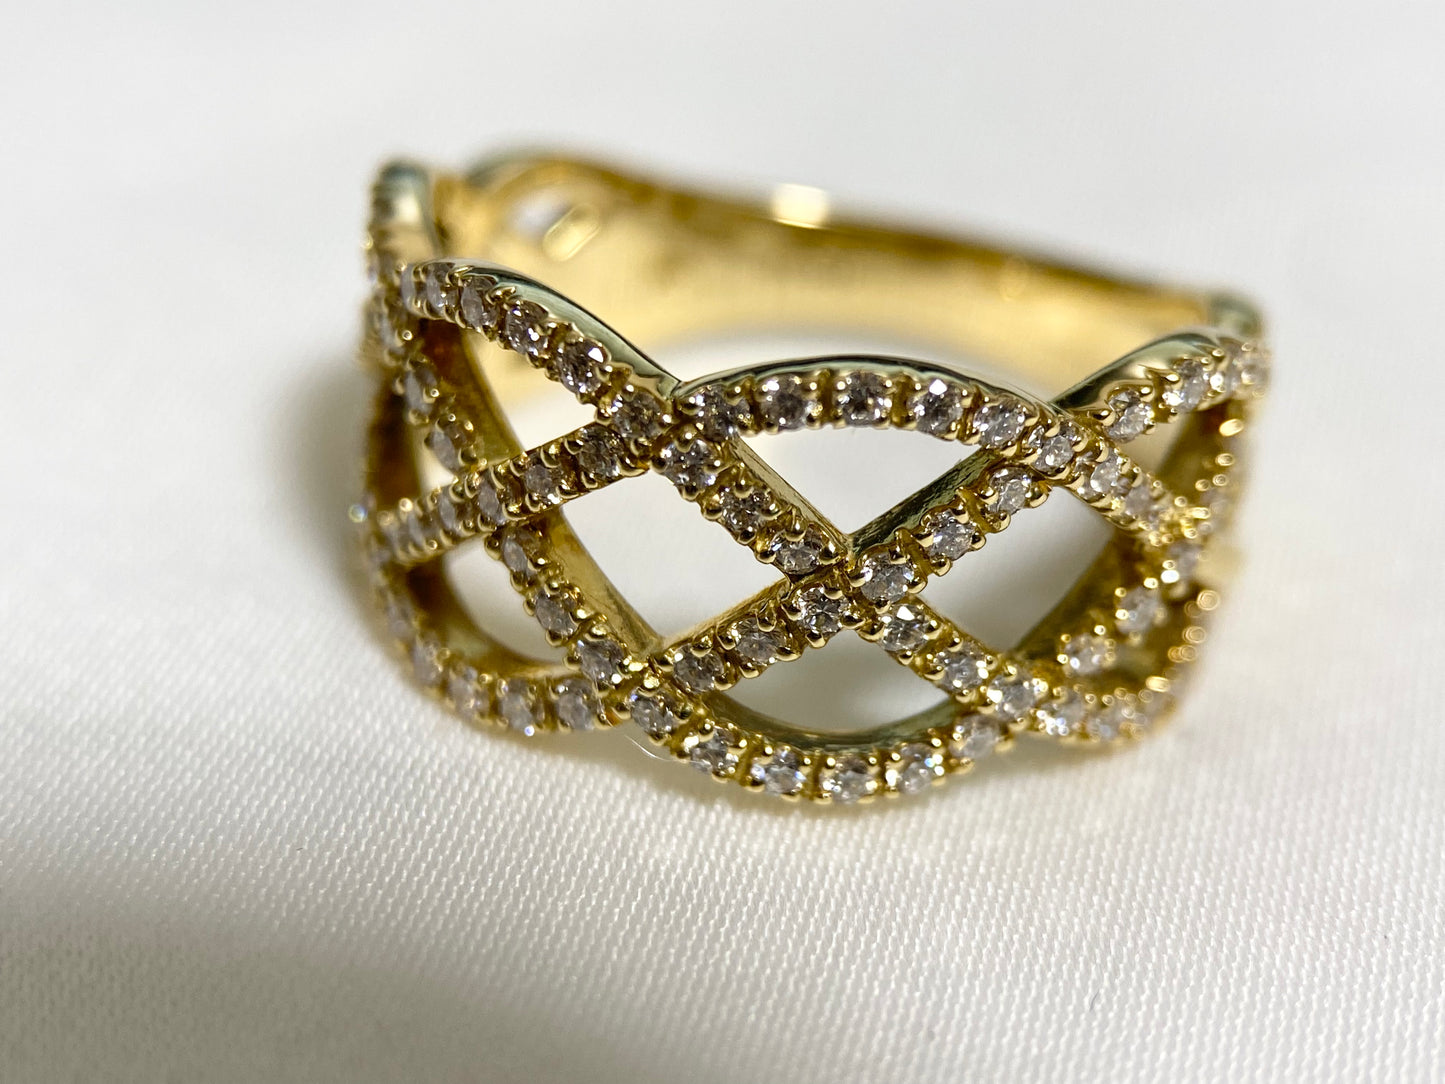 New] Diamond jewelry conceived from cobblestones, luxury ornamental ring.